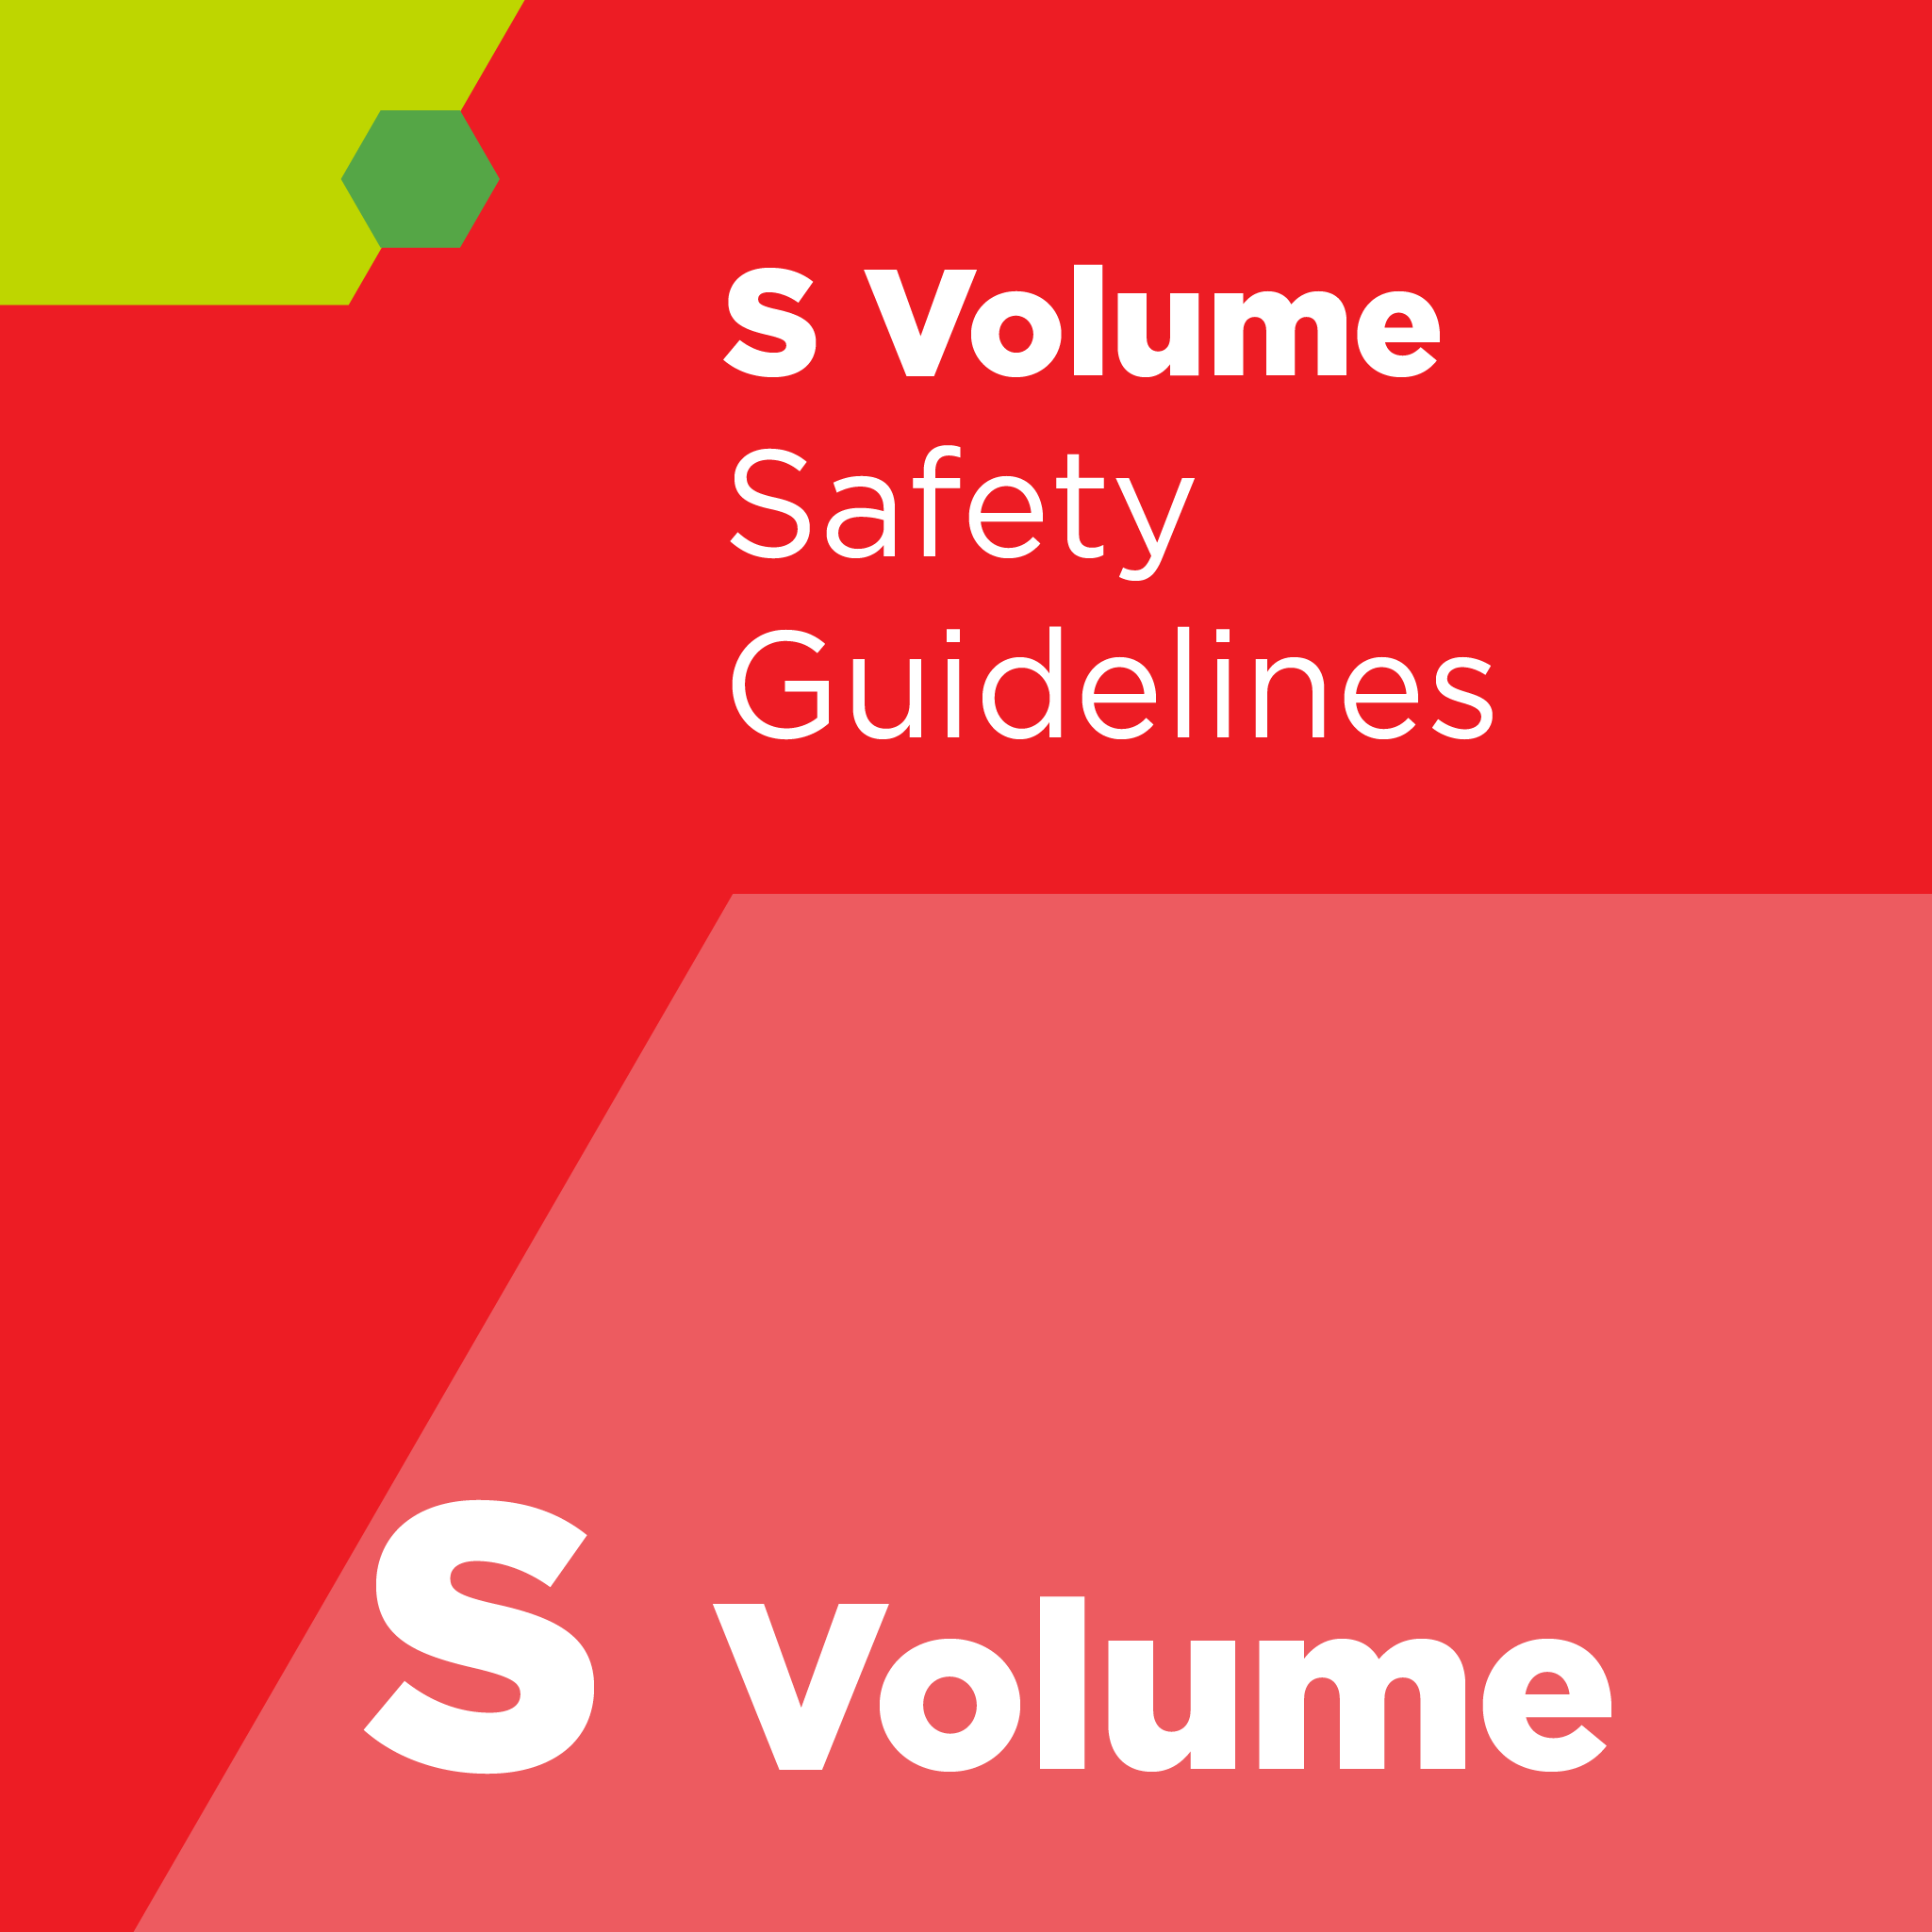 S03000 - SEMI S30 - Safety Guideline for Use of Energetic Materials in Semiconductor R&D and Manufacturing Processes